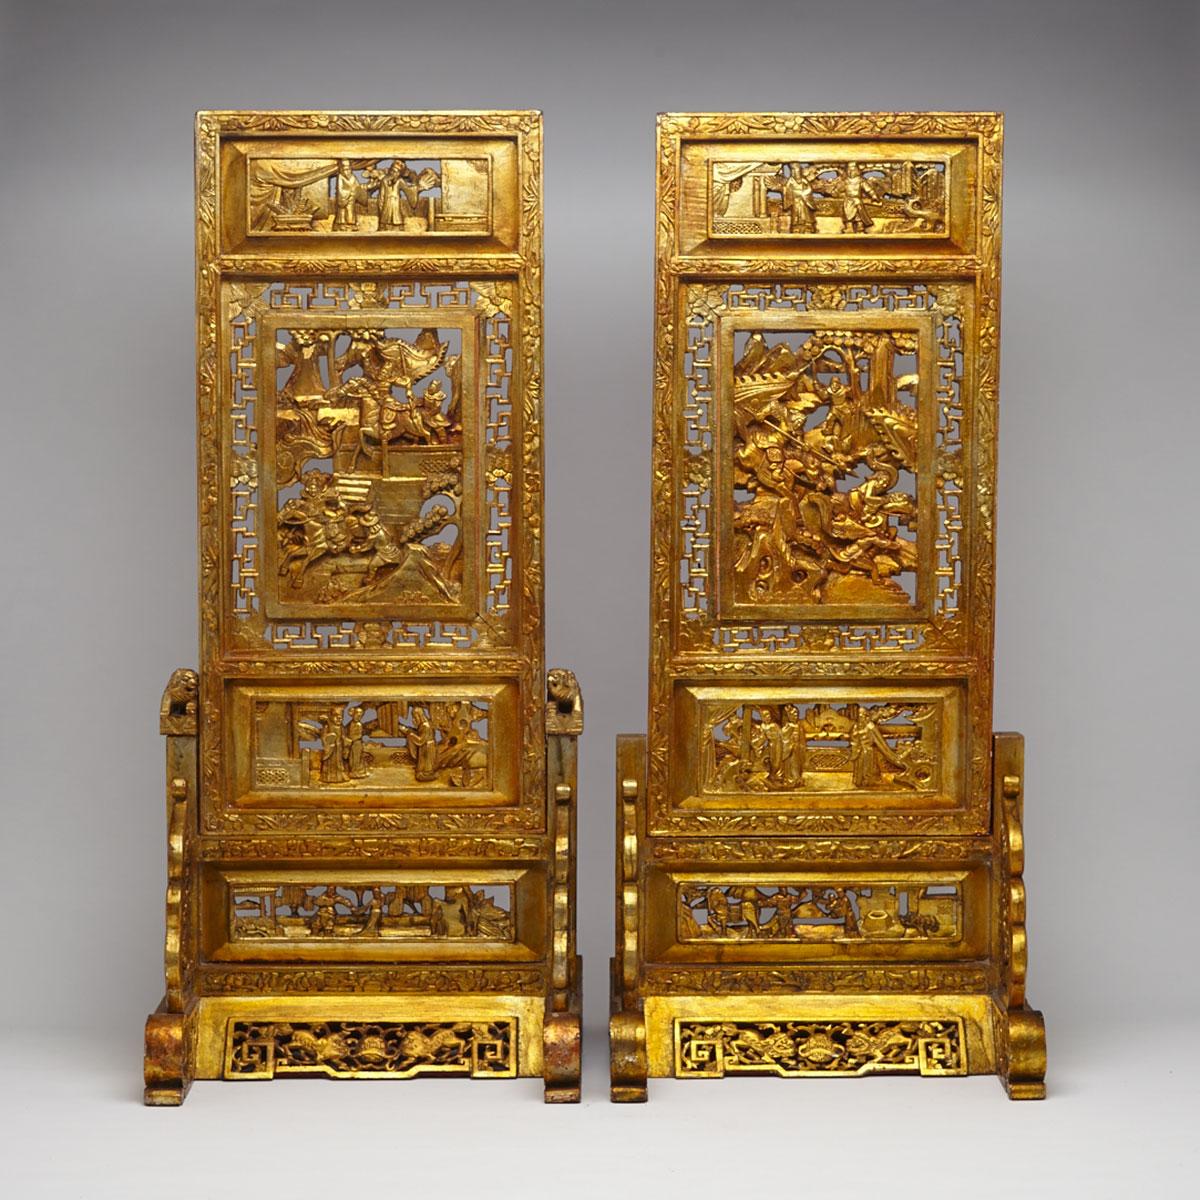 Pair of Large Gilt Lacquered  Wood Architectural Panels and Stands